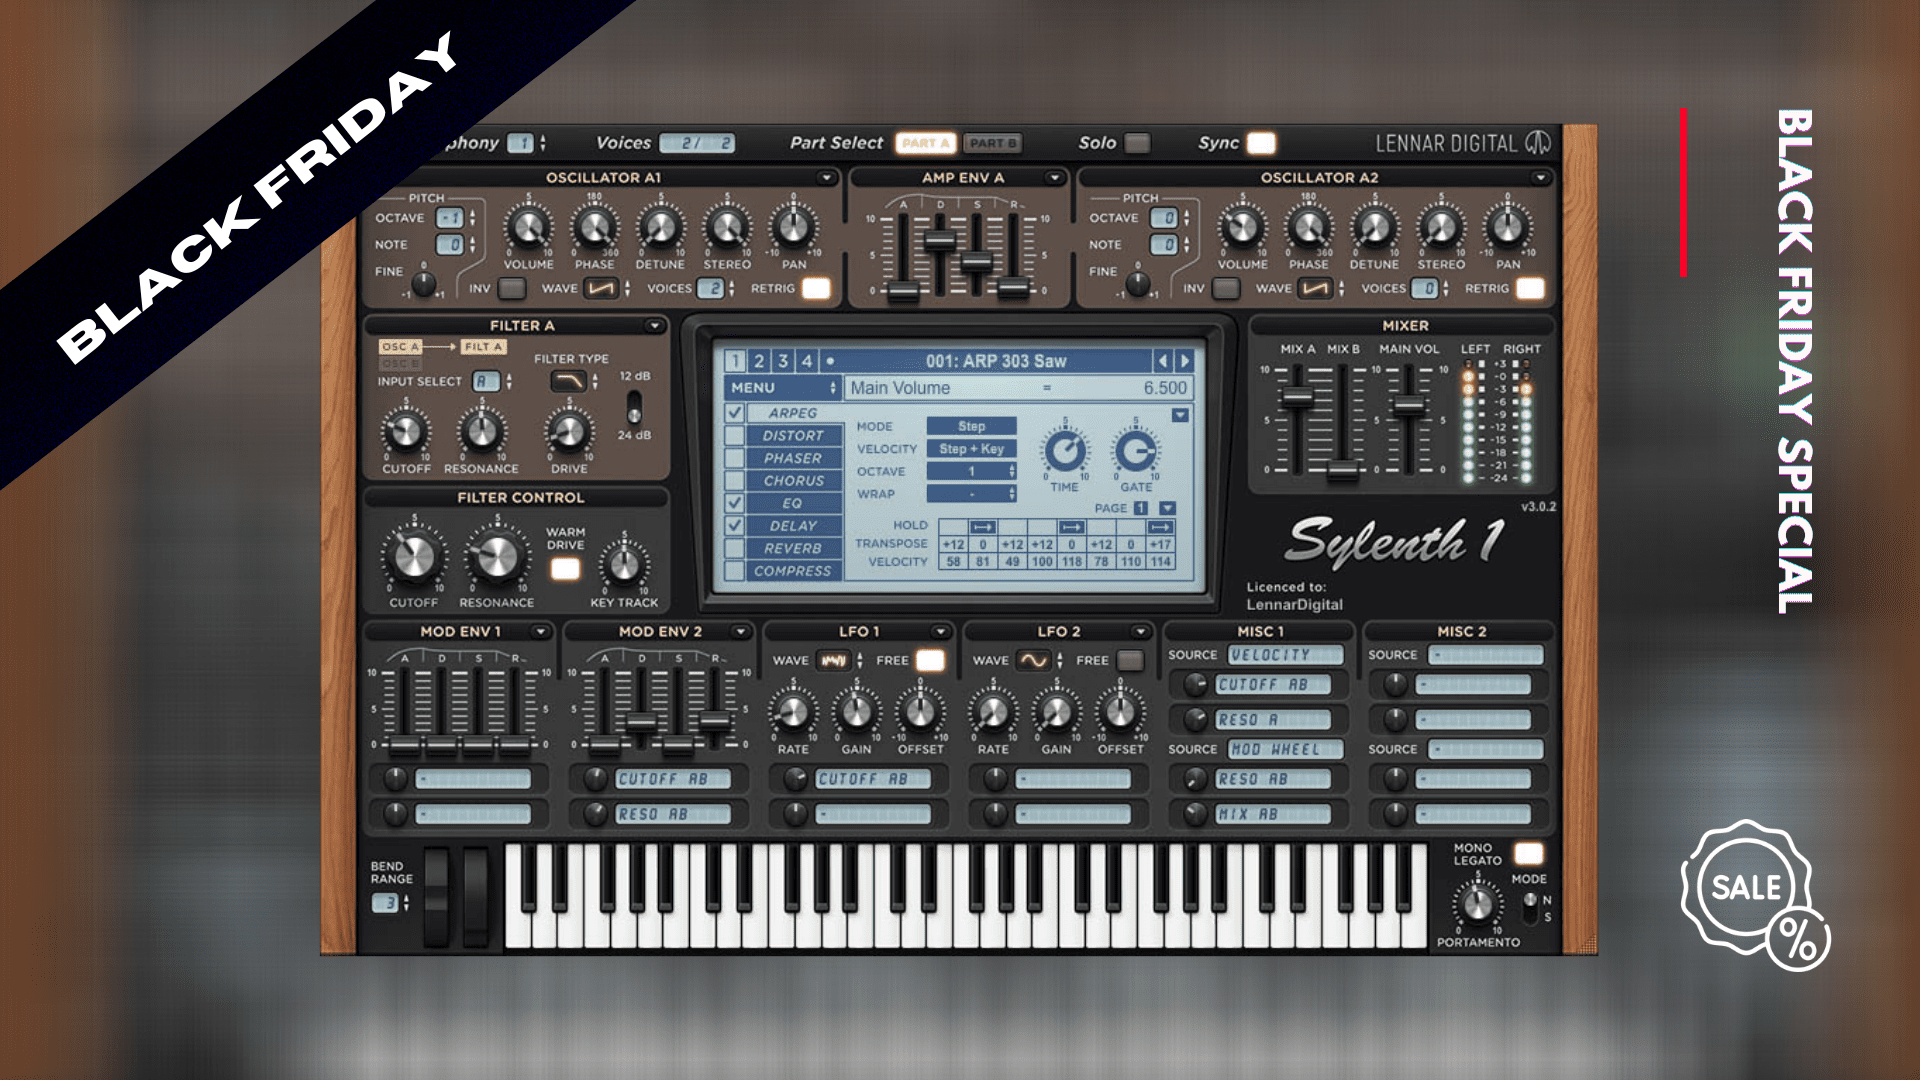 Black Friday 2020: Sylenth1 is available for 25% OFF